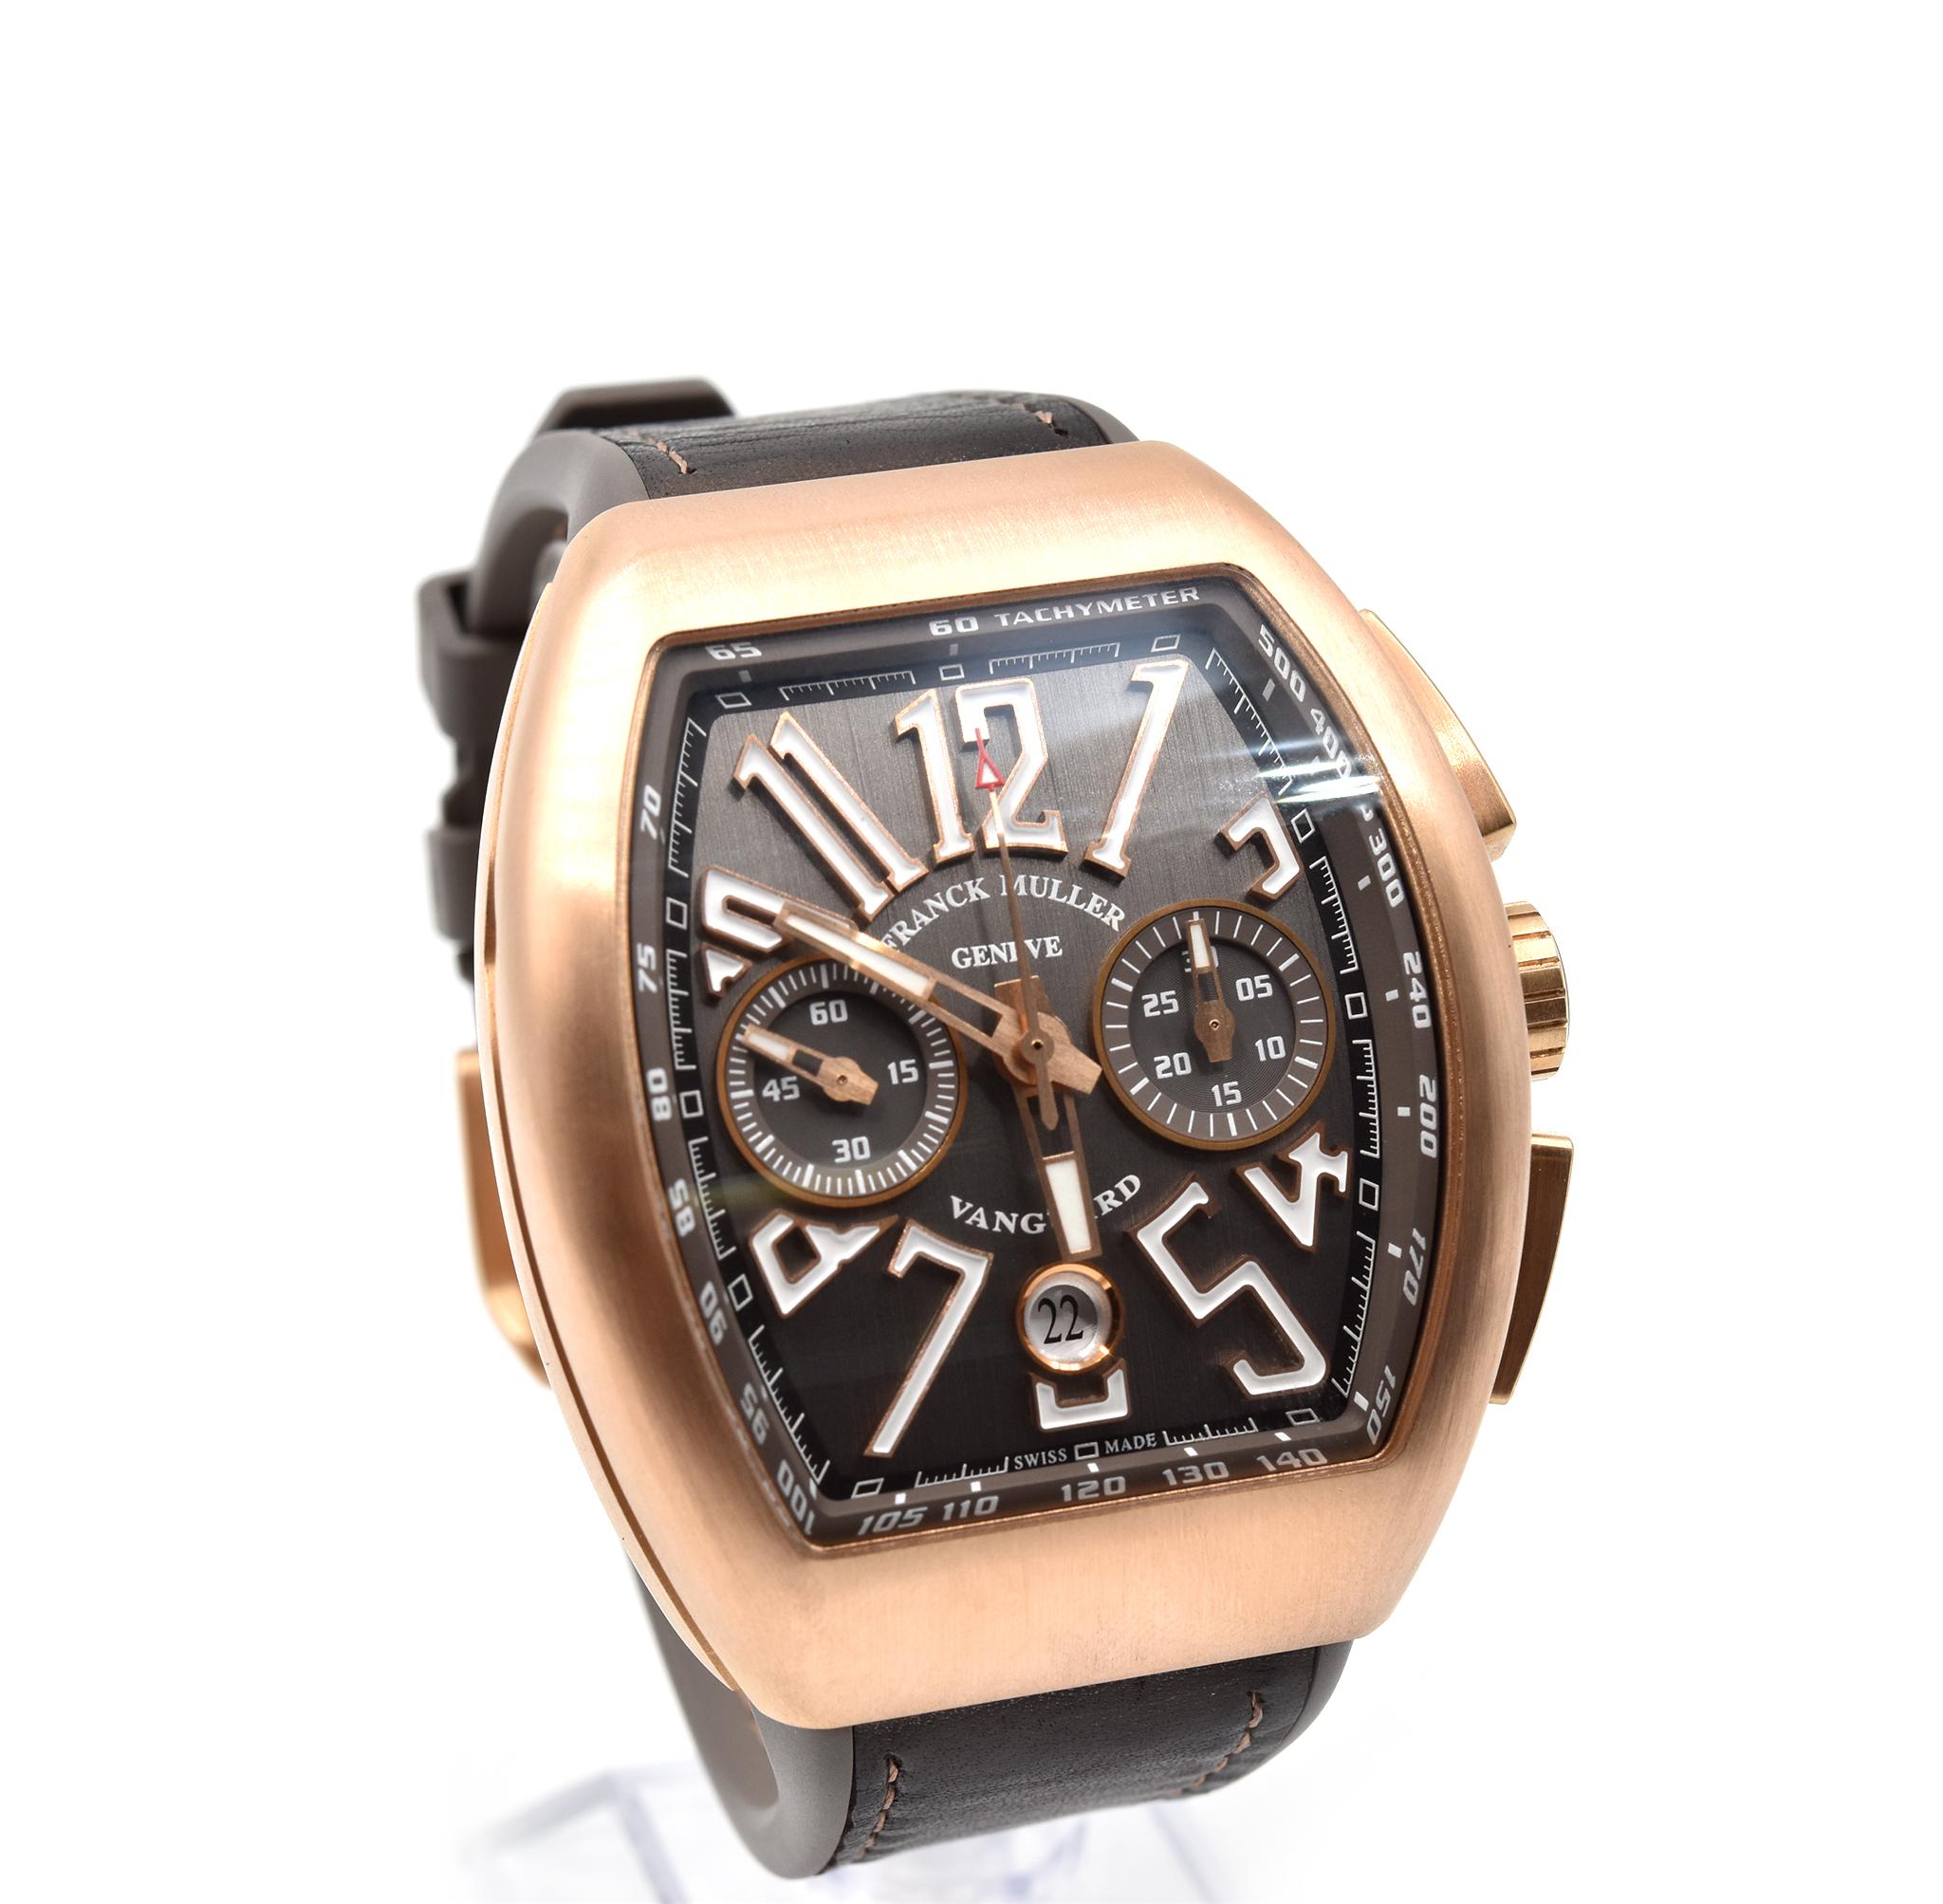 Movement: handmade swiss automatic movement
Function: hours, minutes, stop seconds, chronograph, date
Case: tonneau shaped 54mm x 44mm 18k rose gold case, 18k rose gold fixed bezel, 18k rose gold screw-down crown, sapphire protective crystal, water